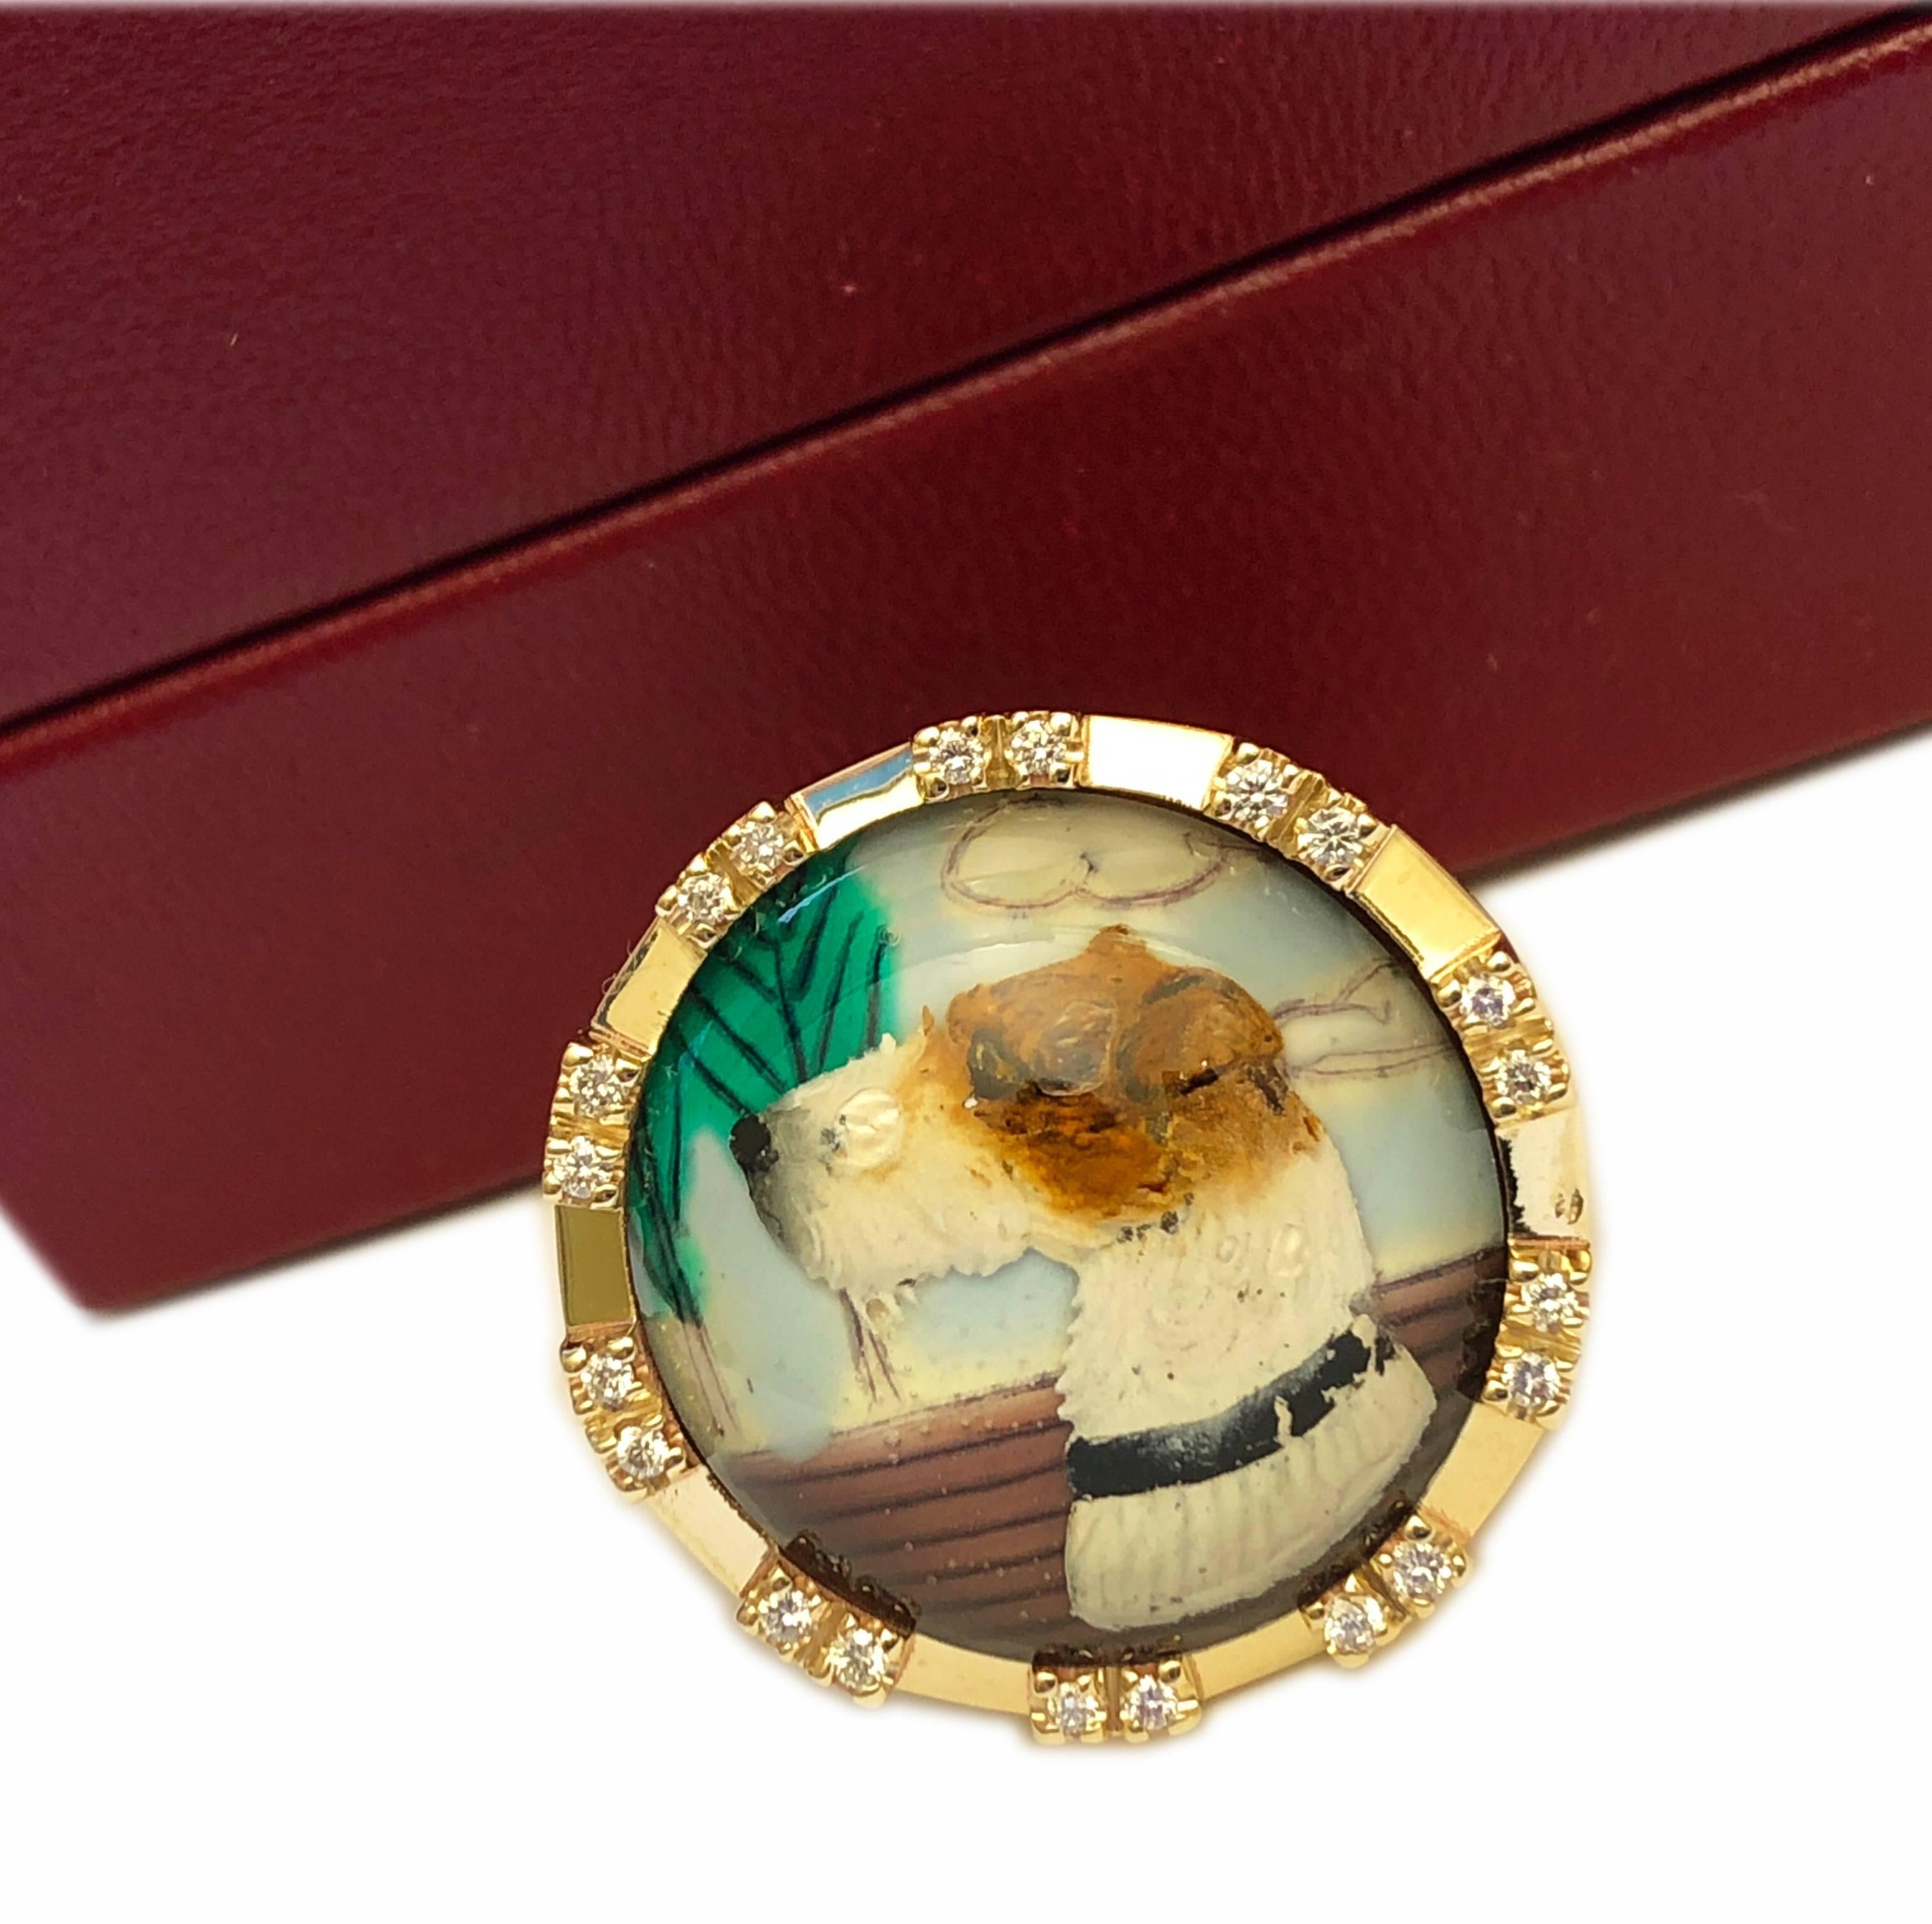 Essex Glasses or Reverse Painting Under Crystal featuring a Fox Terrier in a 0.22Kt diamond and yellow gold signet or cocktail ring setting.
The multicolor, vivid painting creates an unusual three-dimensional effect.
Giovanni Berca loved Essex